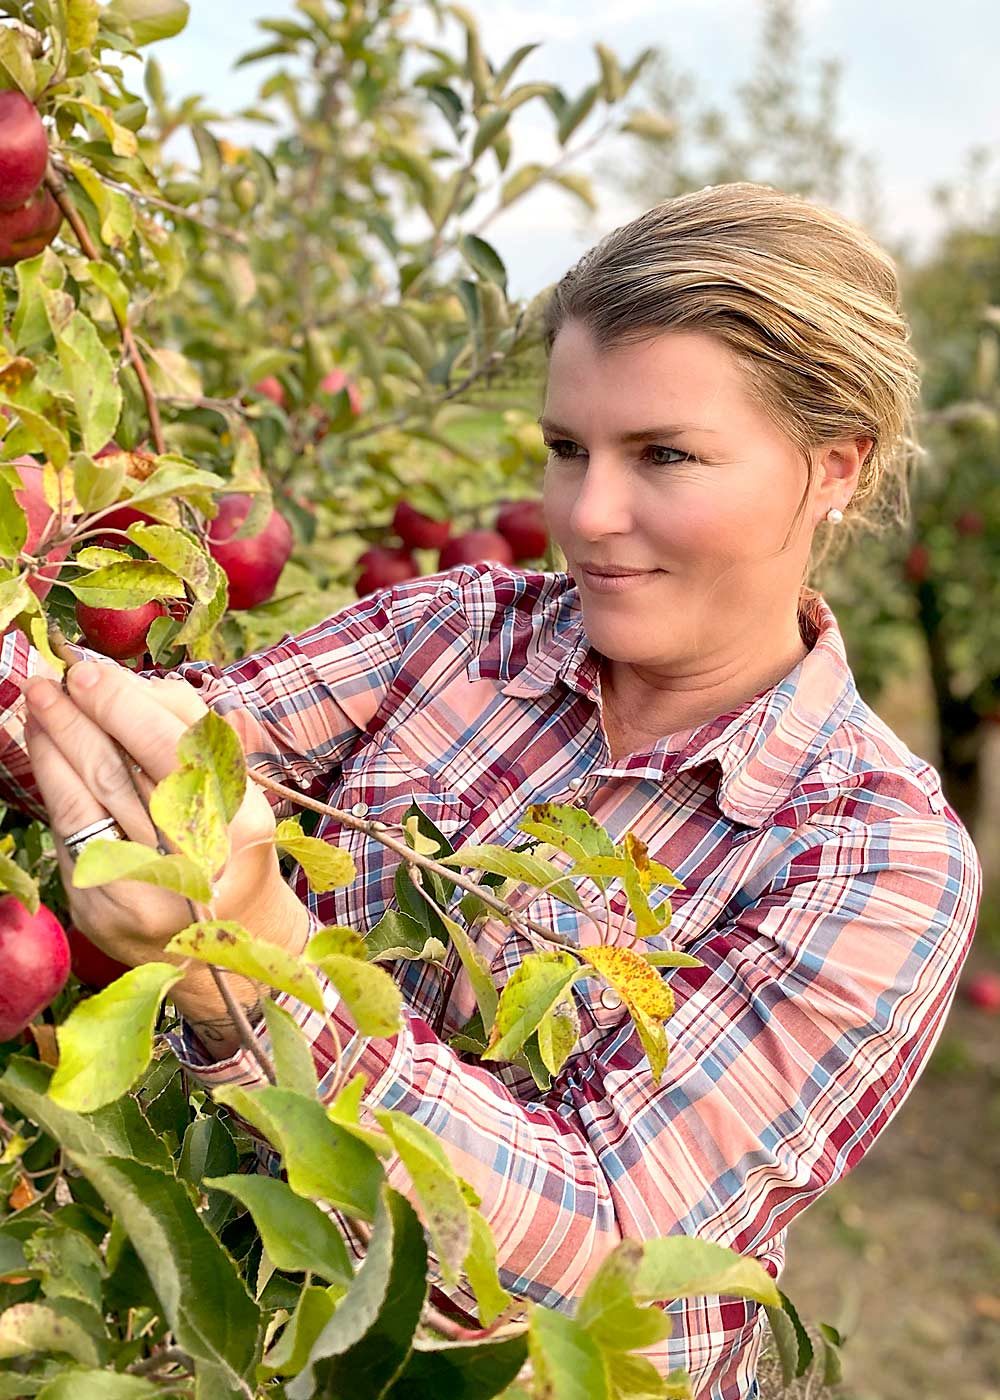 Soil health specialist Christie Apple of CropScout Christie Consulting urges orchardists and vineyardists to consider the contributions of soil microbes to get the most from their soil, trees and vines. (Courtesy Christie Apple)